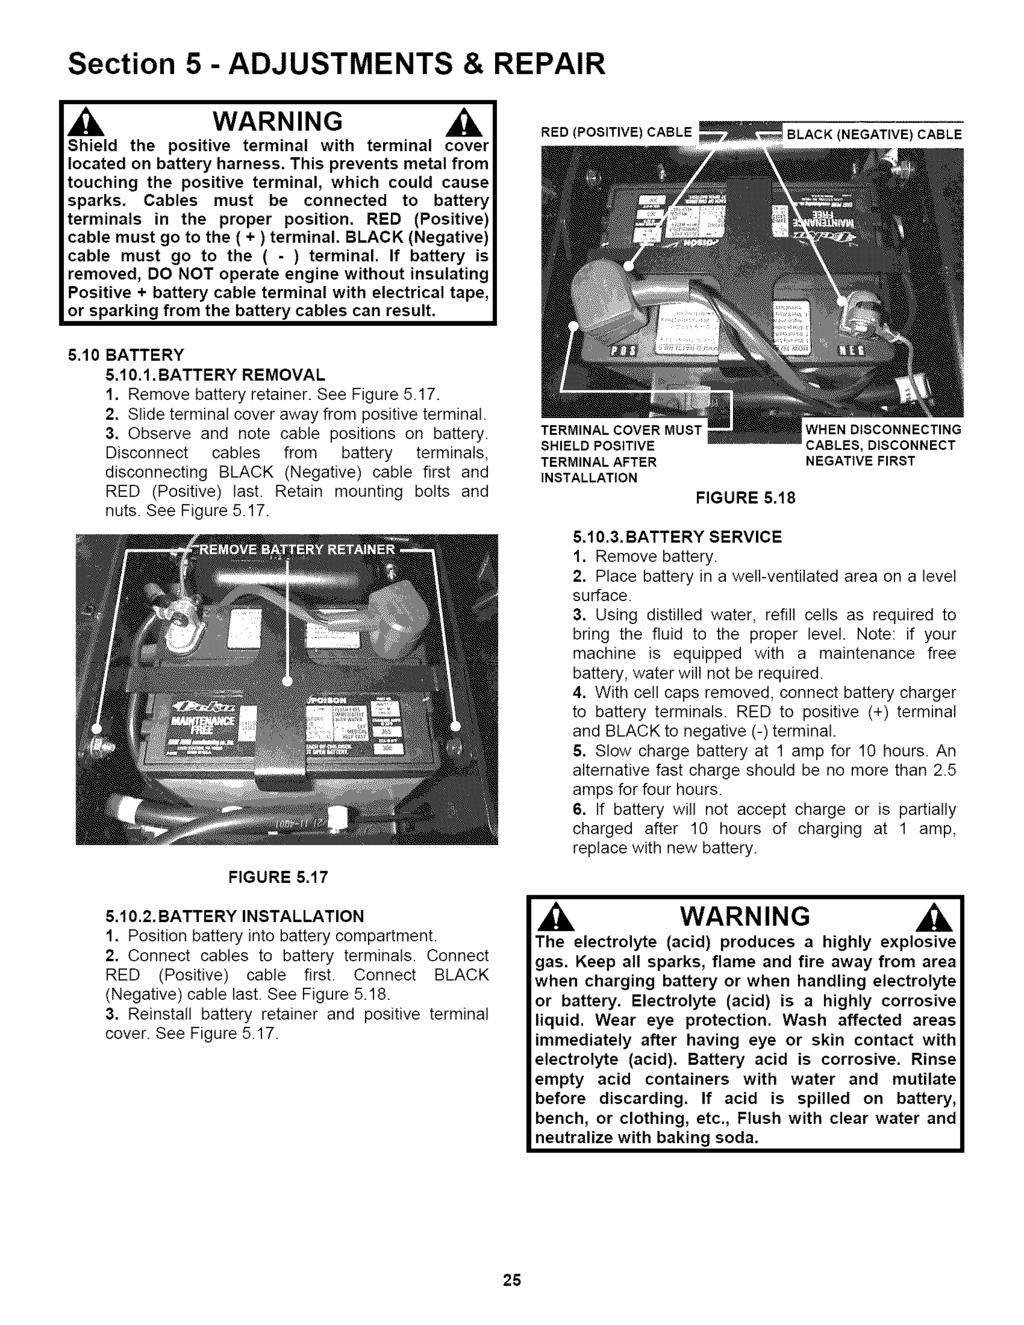 Section 5 - ADJUSTMENTS & REPAIR Shield the positive terminal with terminal cover located on battery harness. This prevents metal from touching the positive terminal, which could cause sparks.